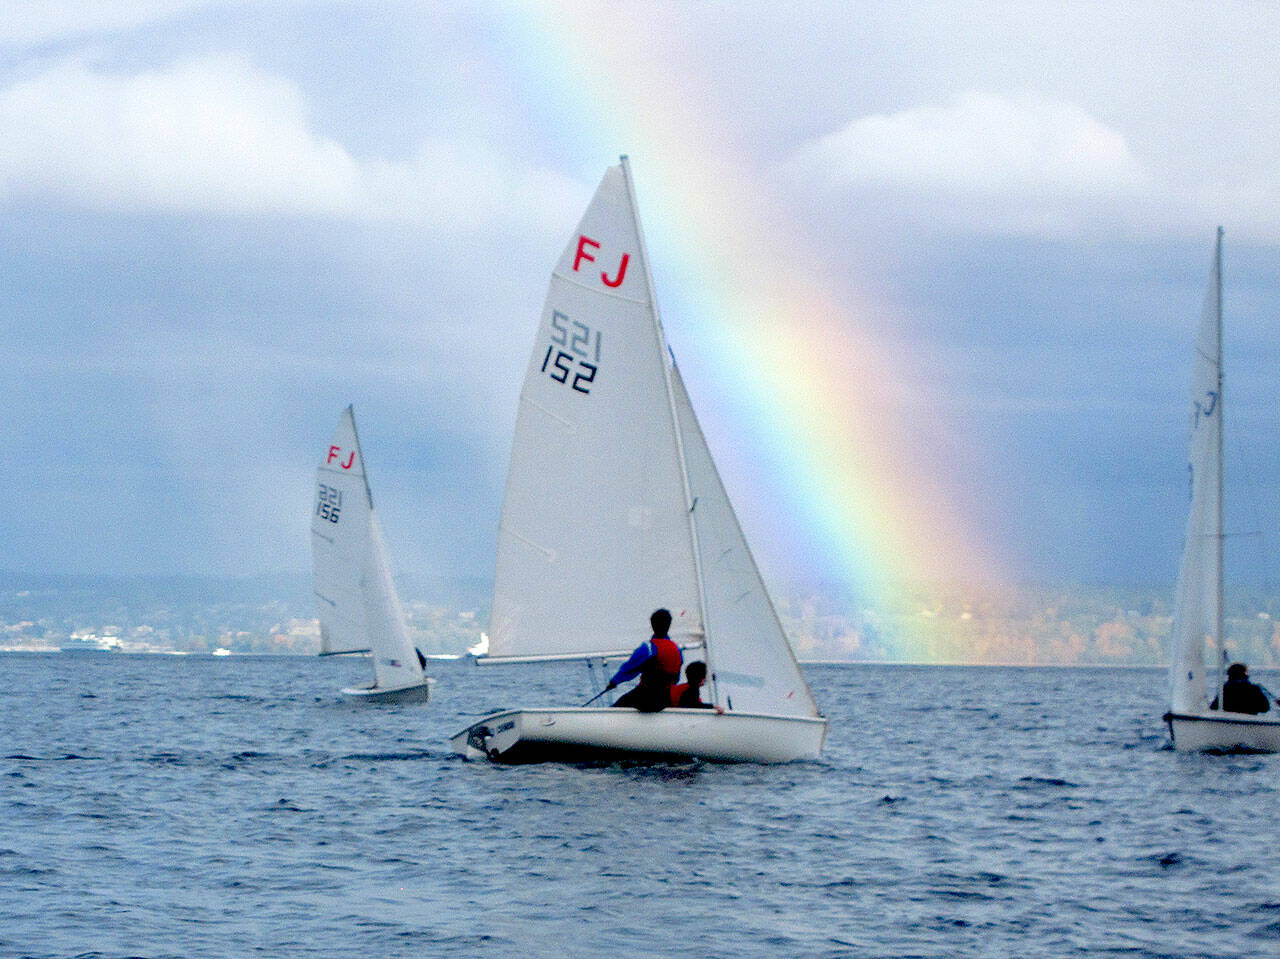 Port Angeles High School sailing team members Elliot Dahlin and Fern Knobel (152), sail at a regional scrimmage this weekend off Kingston as a rainbow comes out. Teammates Ozzy Minard and Ella Schulz are in boat 156. (Photo courtesy Perry Brestel)